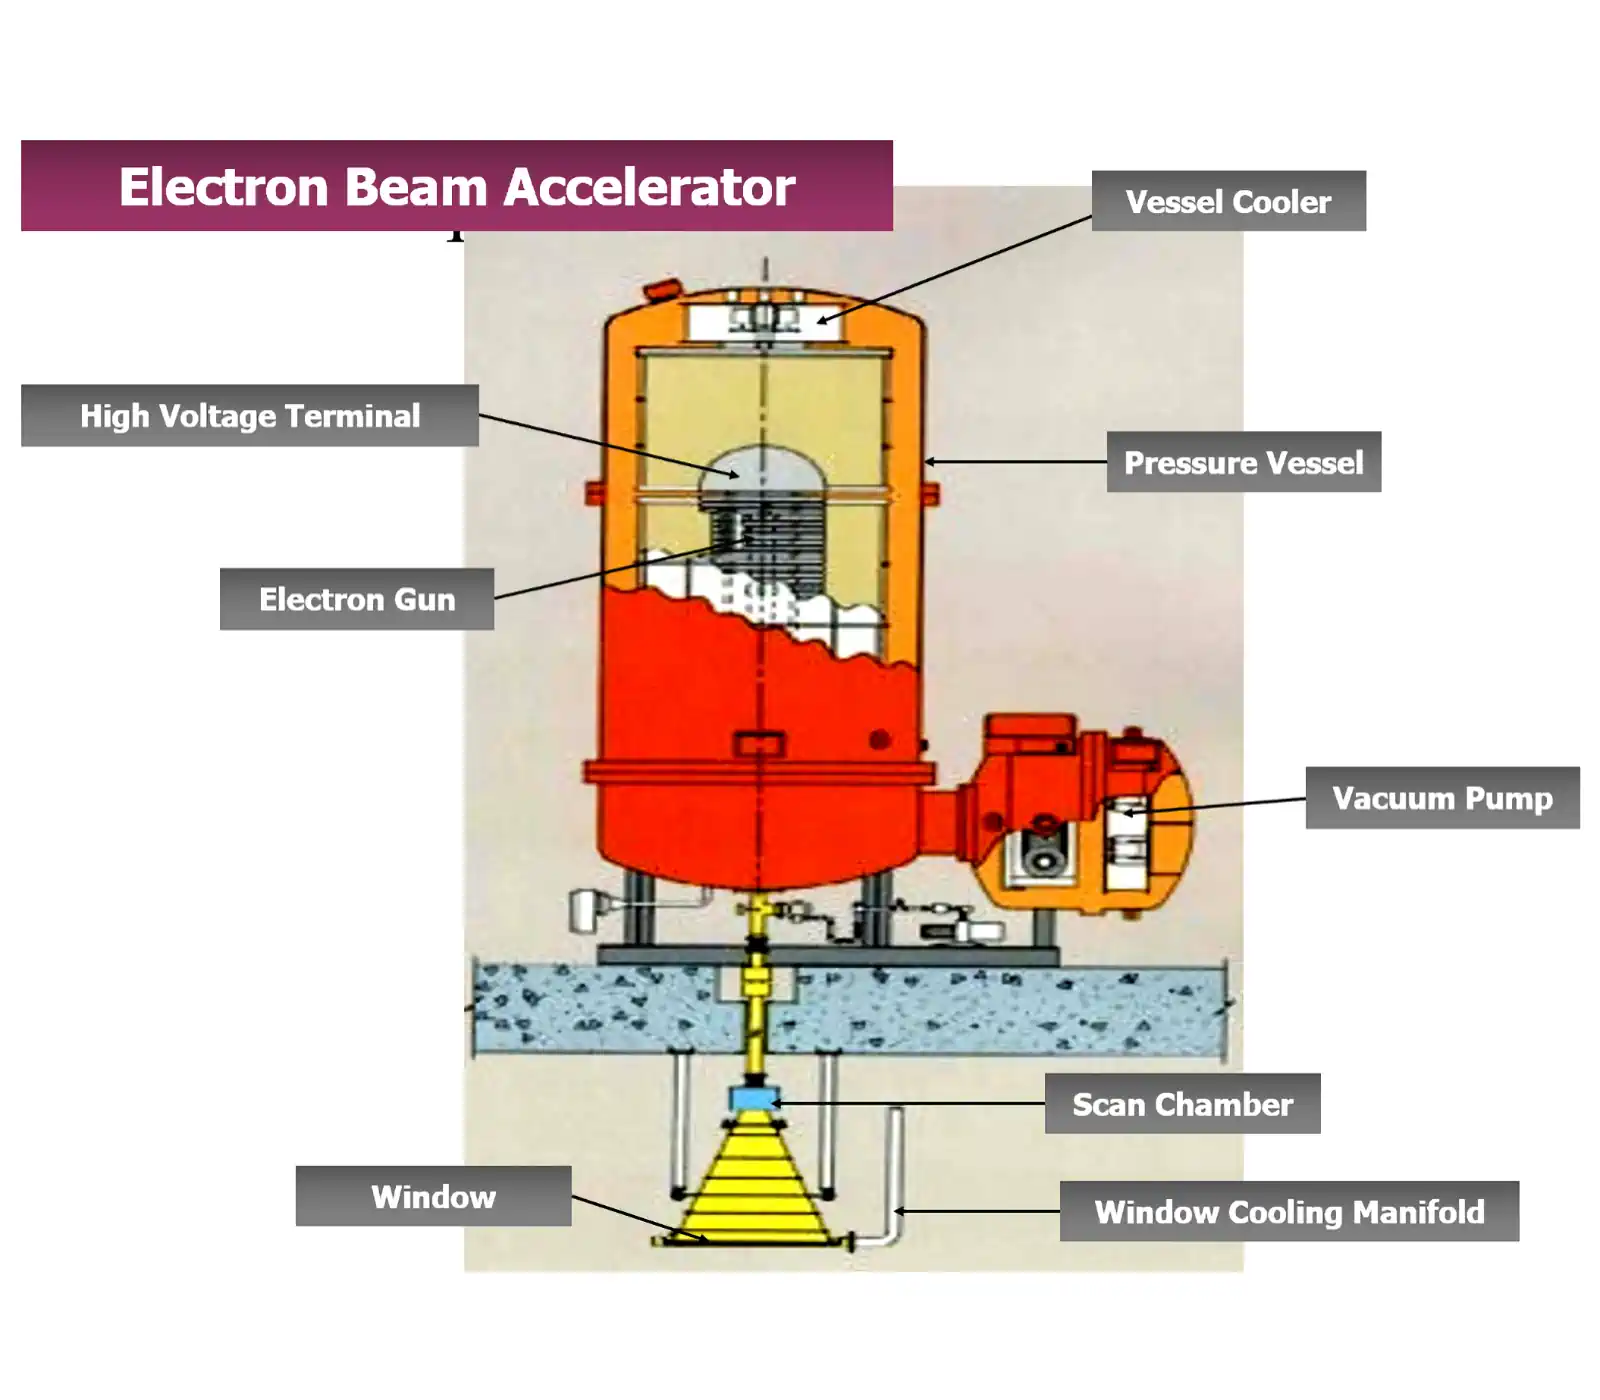 Components of an Electron Beam Accelerator